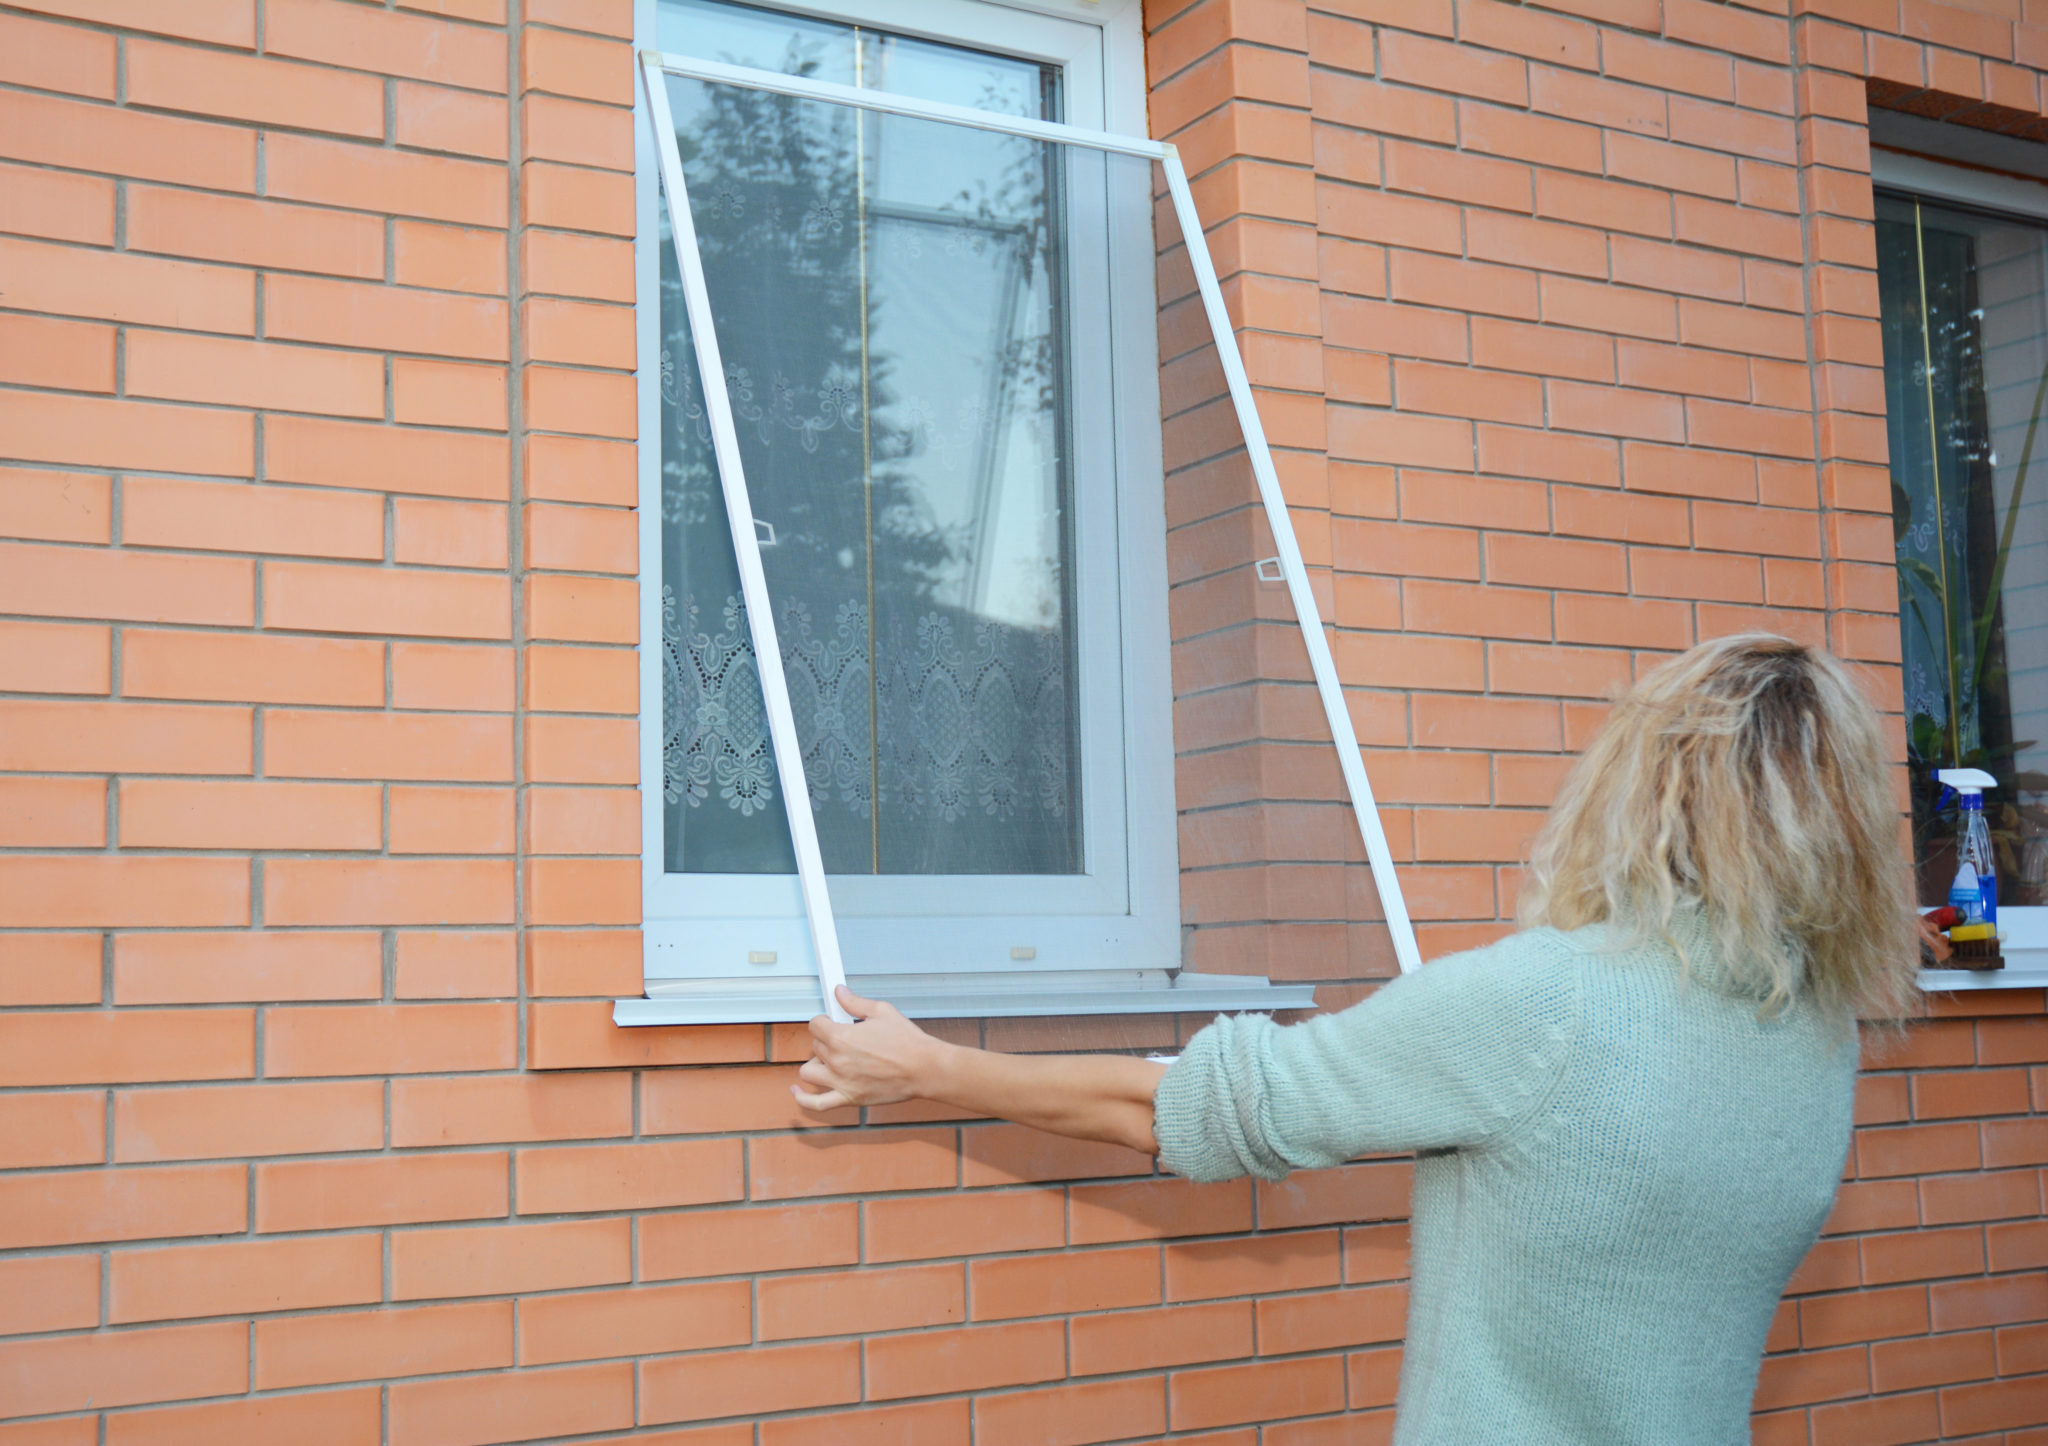 Woman removing window screen for cleaning wire screen on house window.